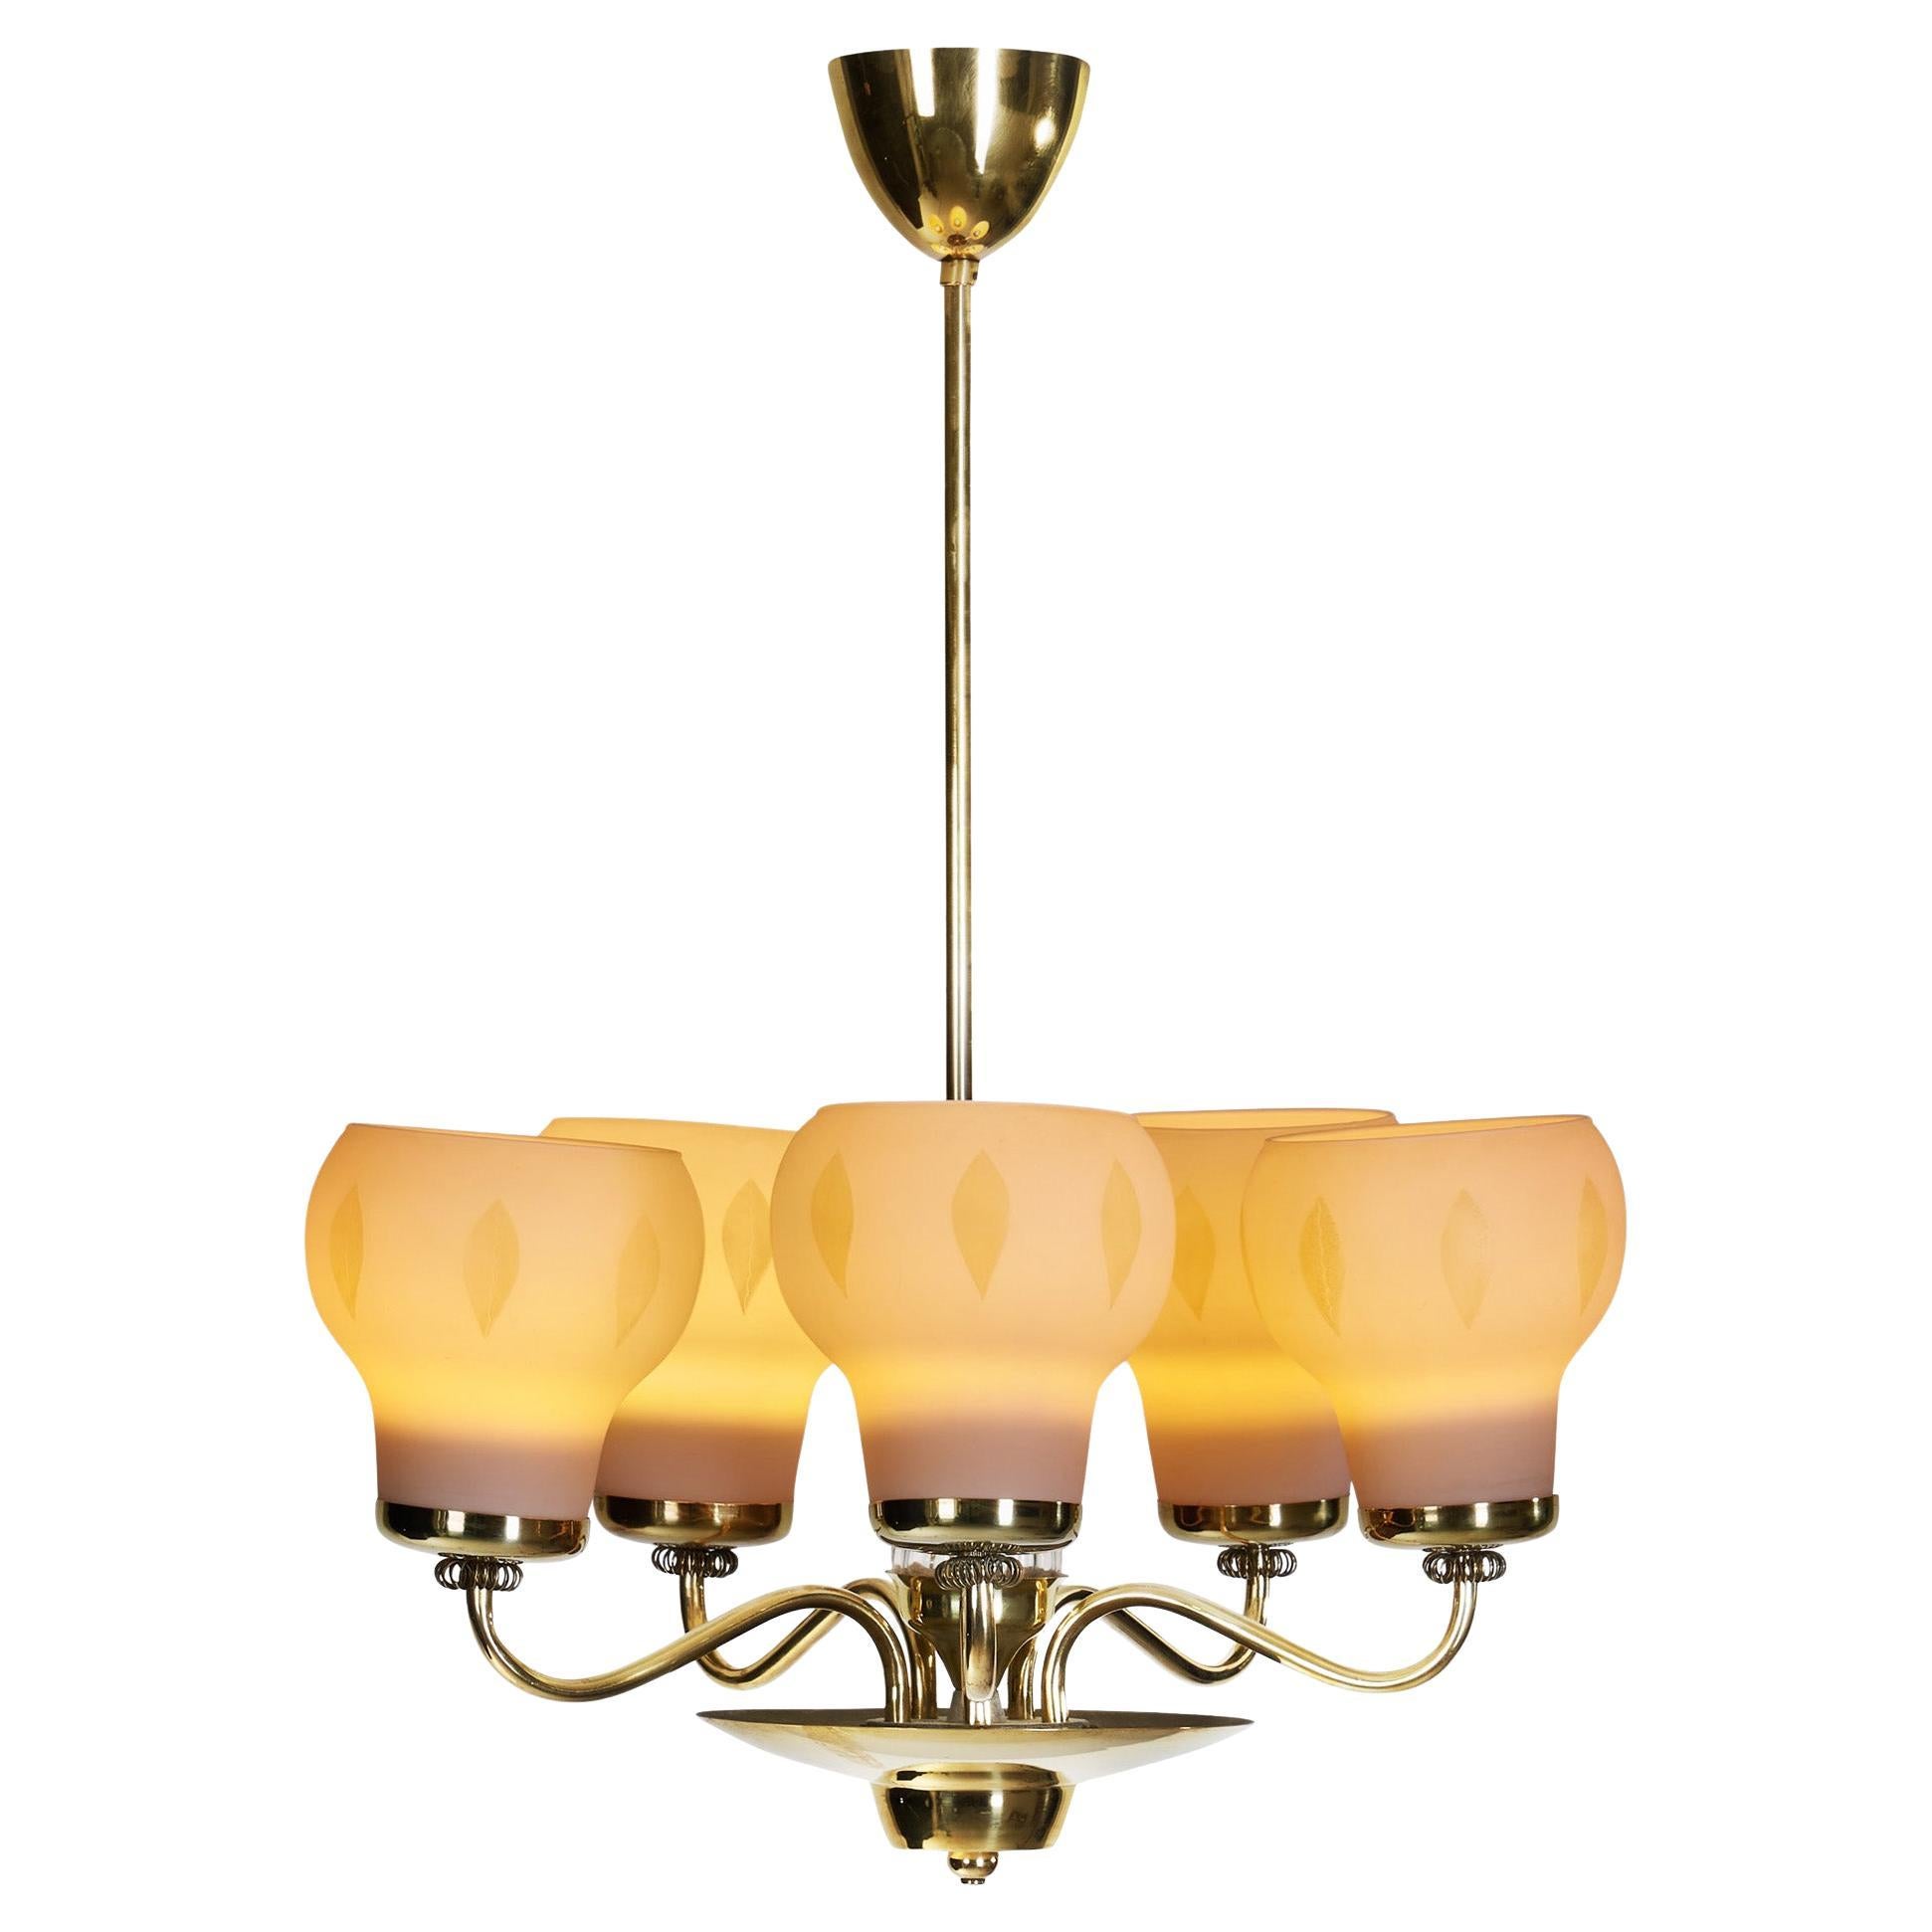 Finnish Brass and Opal Glass Chandelier by Saariston Valaisin, Finland ca 1950s For Sale